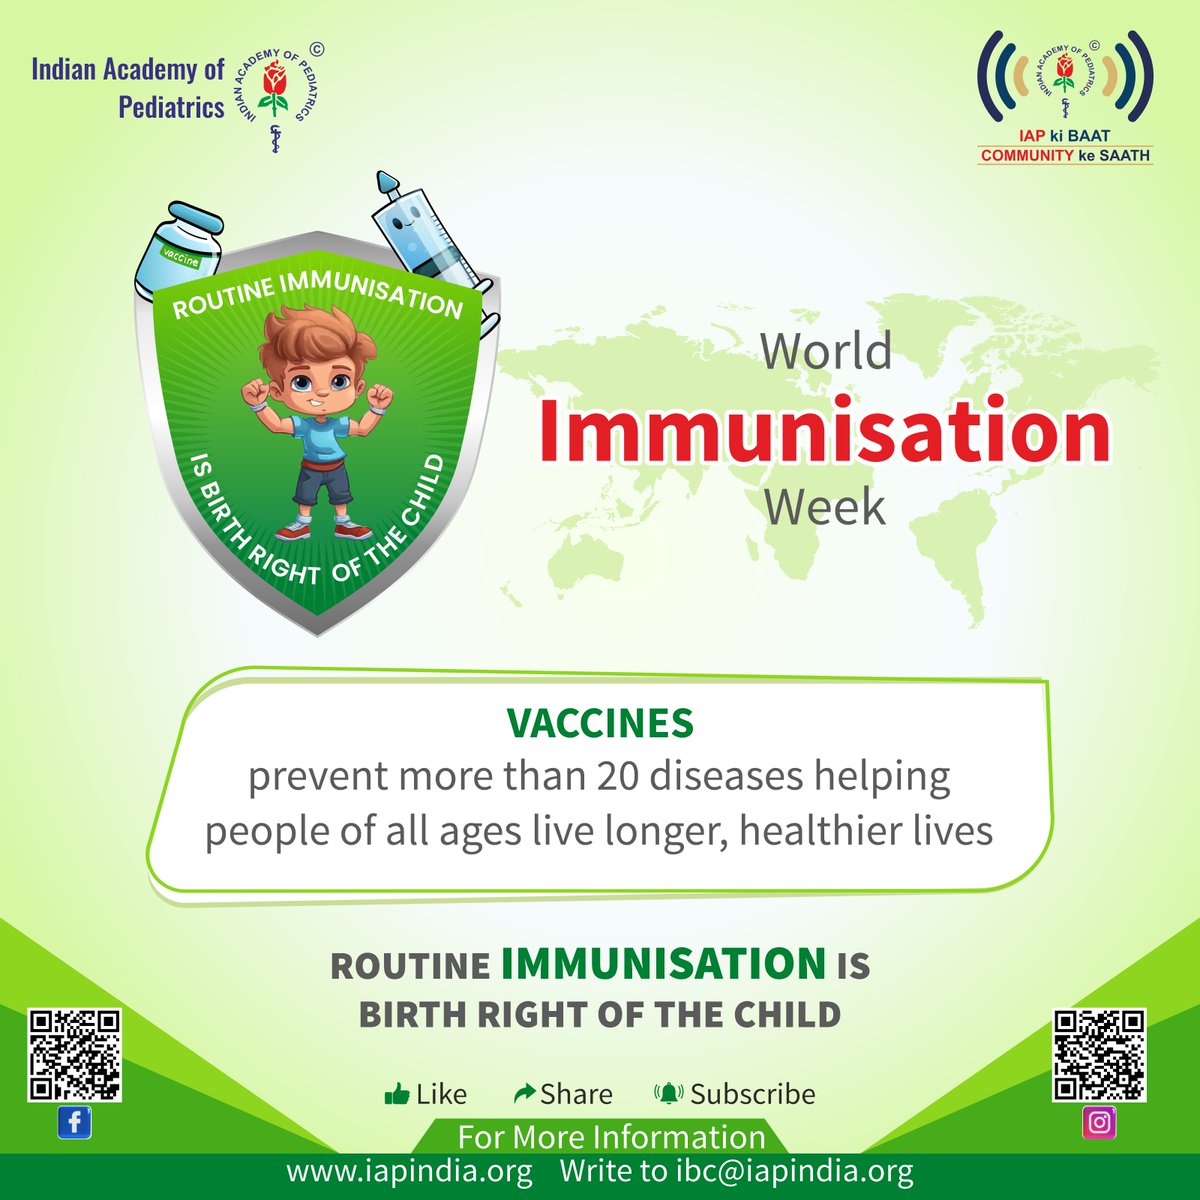 💉 It's World Immunisation Week, remember routine #immunisation is the birthright of every child!👶 Stay strong, stay vaccinated! 💪 #iapkibaat #iap #indianacademyofpediatrics #pediatrics #pediatricians #childcare #childhealth #healthcare #WorldImmunisationWeek #VaccinesWork